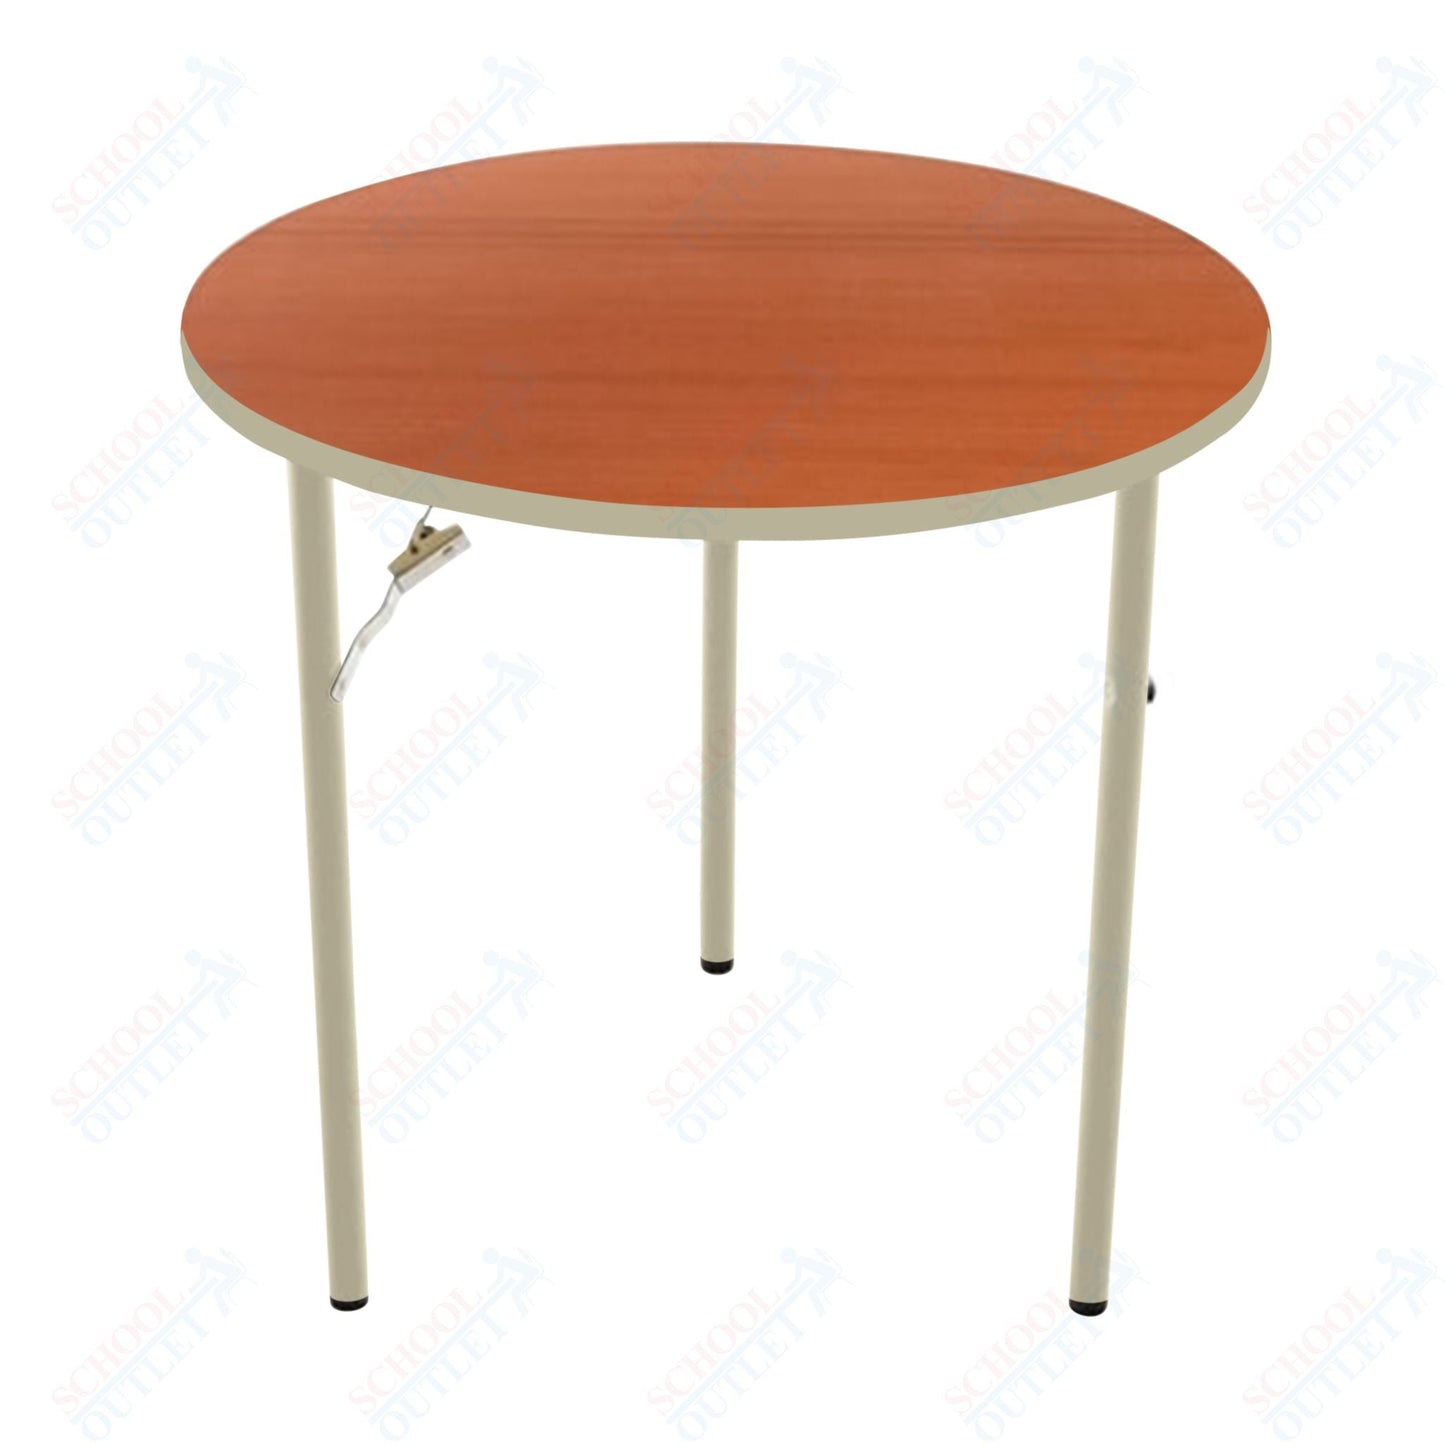 AmTab Folding Table - Plywood Stained and Sealed - Vinyl T - Molding Edge - Round - 48" Diameter x 29"H (AmTab AMT - R48PM) - SchoolOutlet